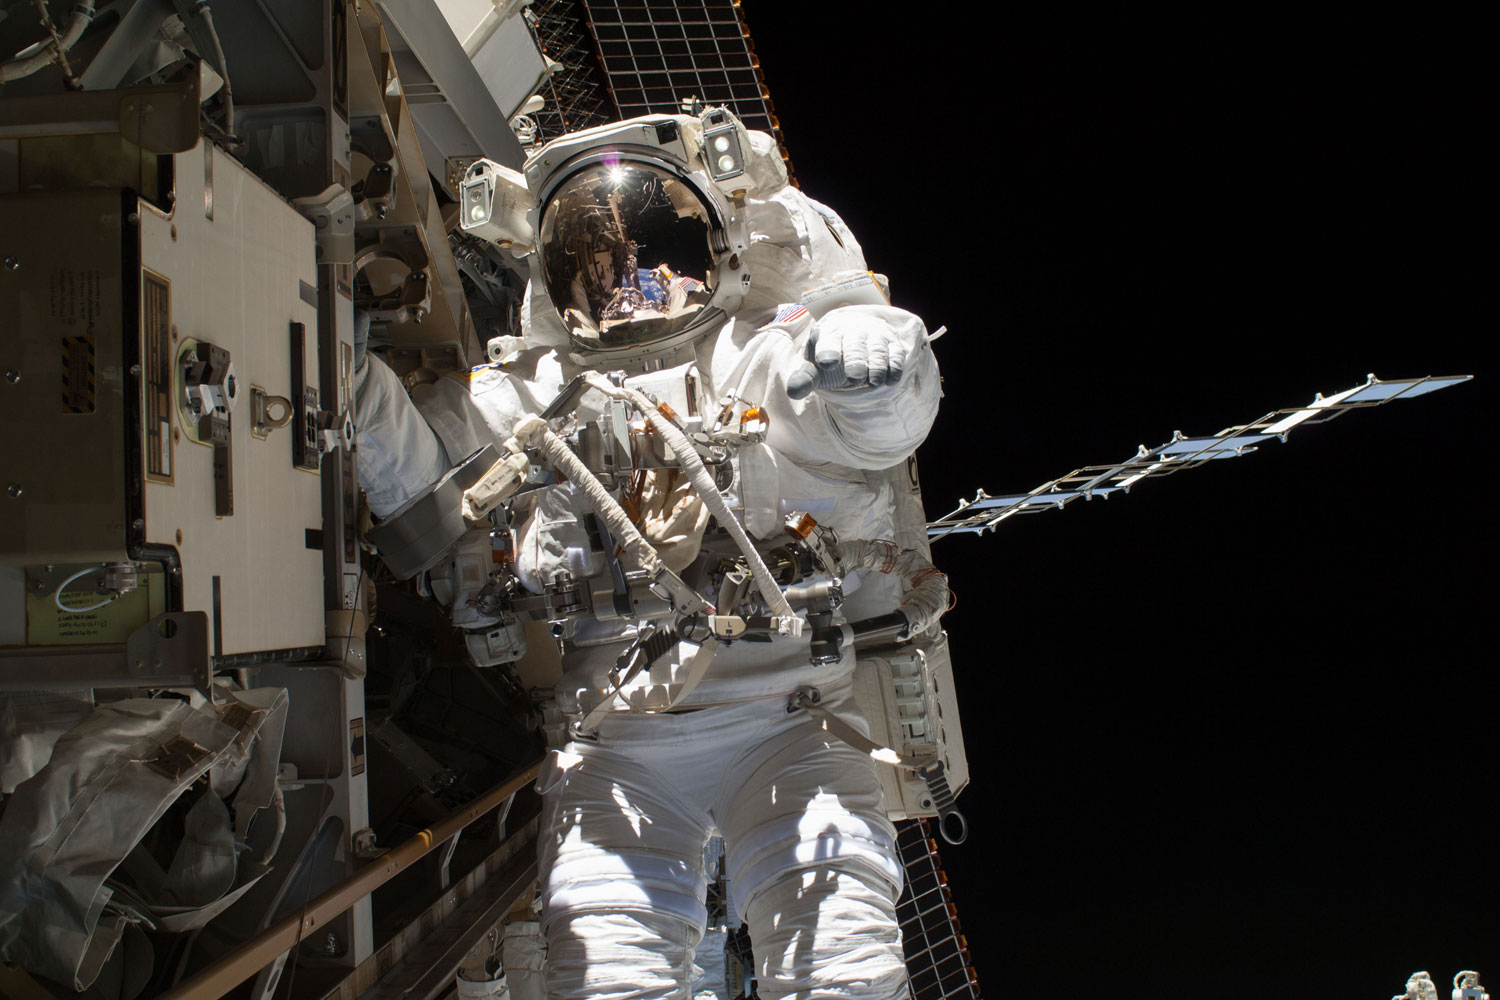 NASA astronaut Steve Swanson during a spacewalk to replace a failed backup computer relay box on the International Space Station on April 22, 2014. He was accompanied on the spacewalk by fellow Flight Engineer Rick Mastracchio of NASA, who can be seen as a tiny figure anchored several yards away reflected in Swanson's helmet visor.